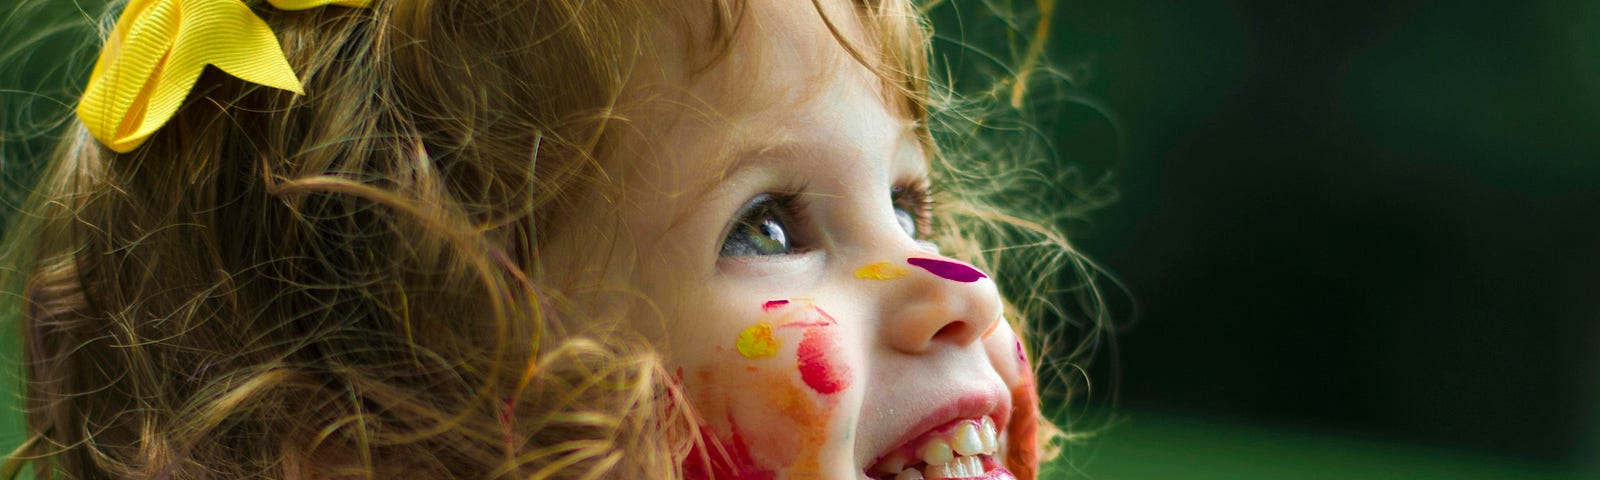 A young child with curly hair and a yellow bow, smiling joyfully with colorful paint smeared on her face and clothes, symbolizing childlike excitement and creativity.